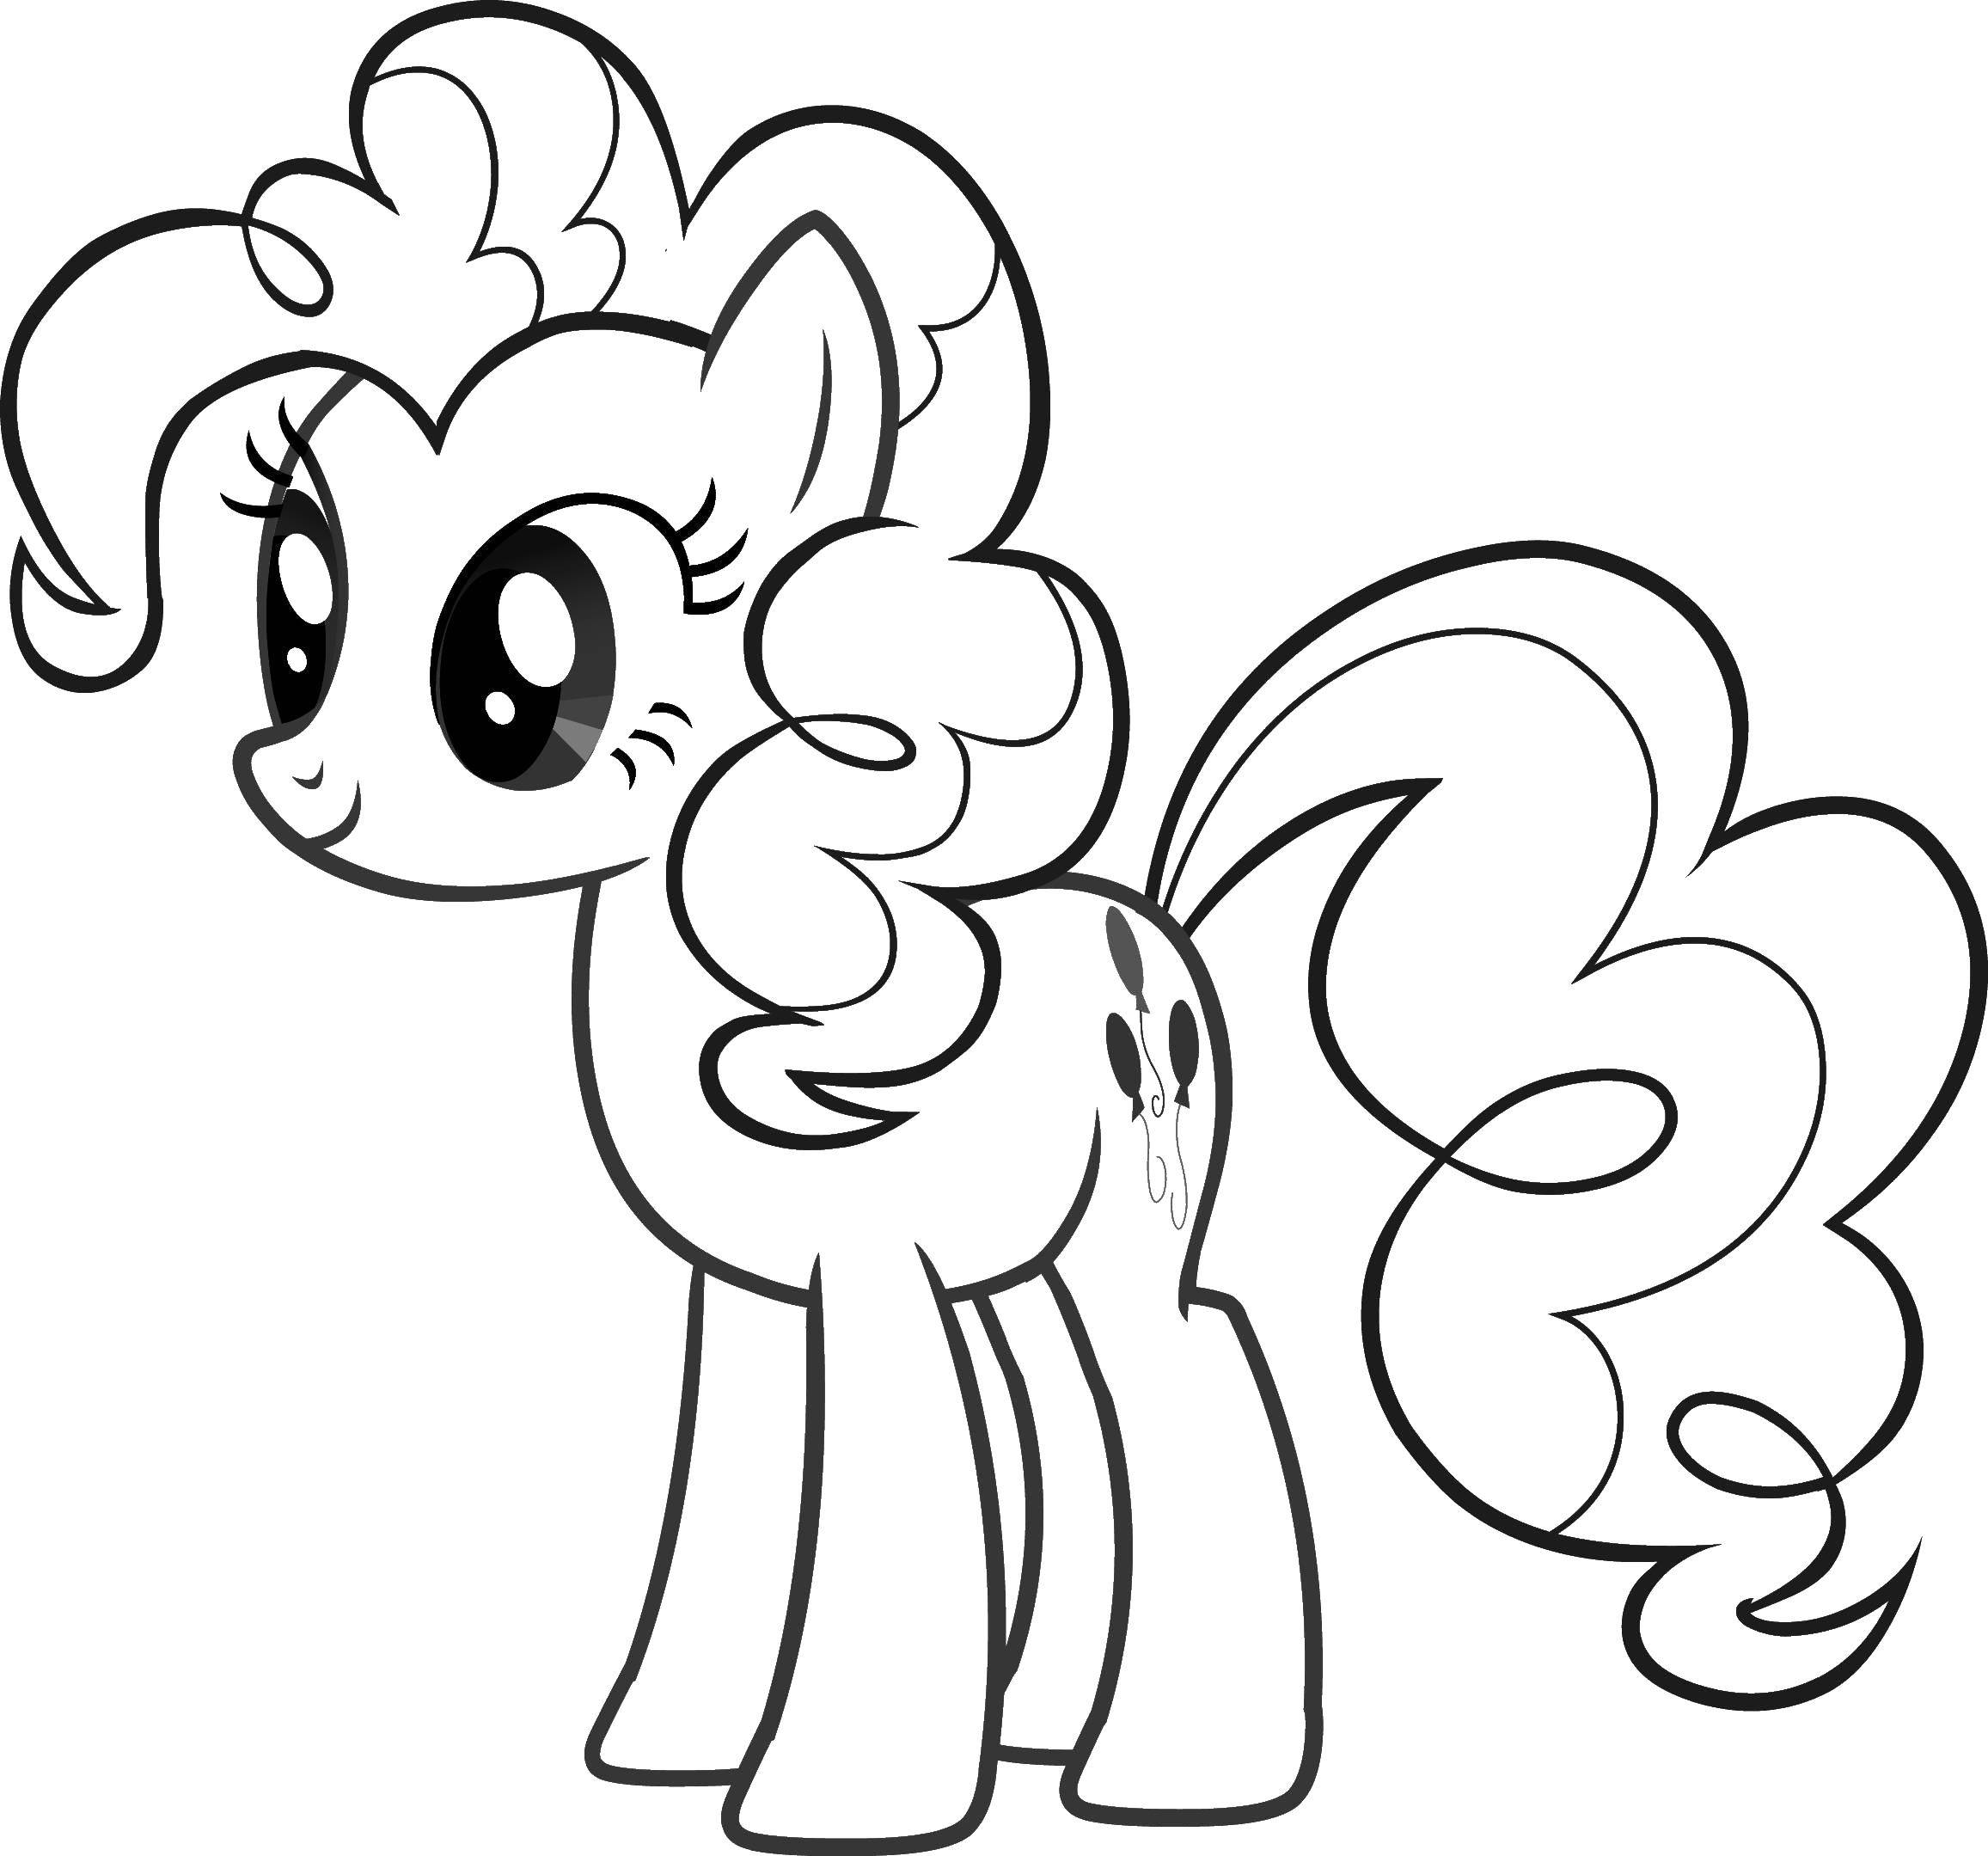 Coloring Pinkie pie. Category my little pony. Tags:  pony, Pinkie.